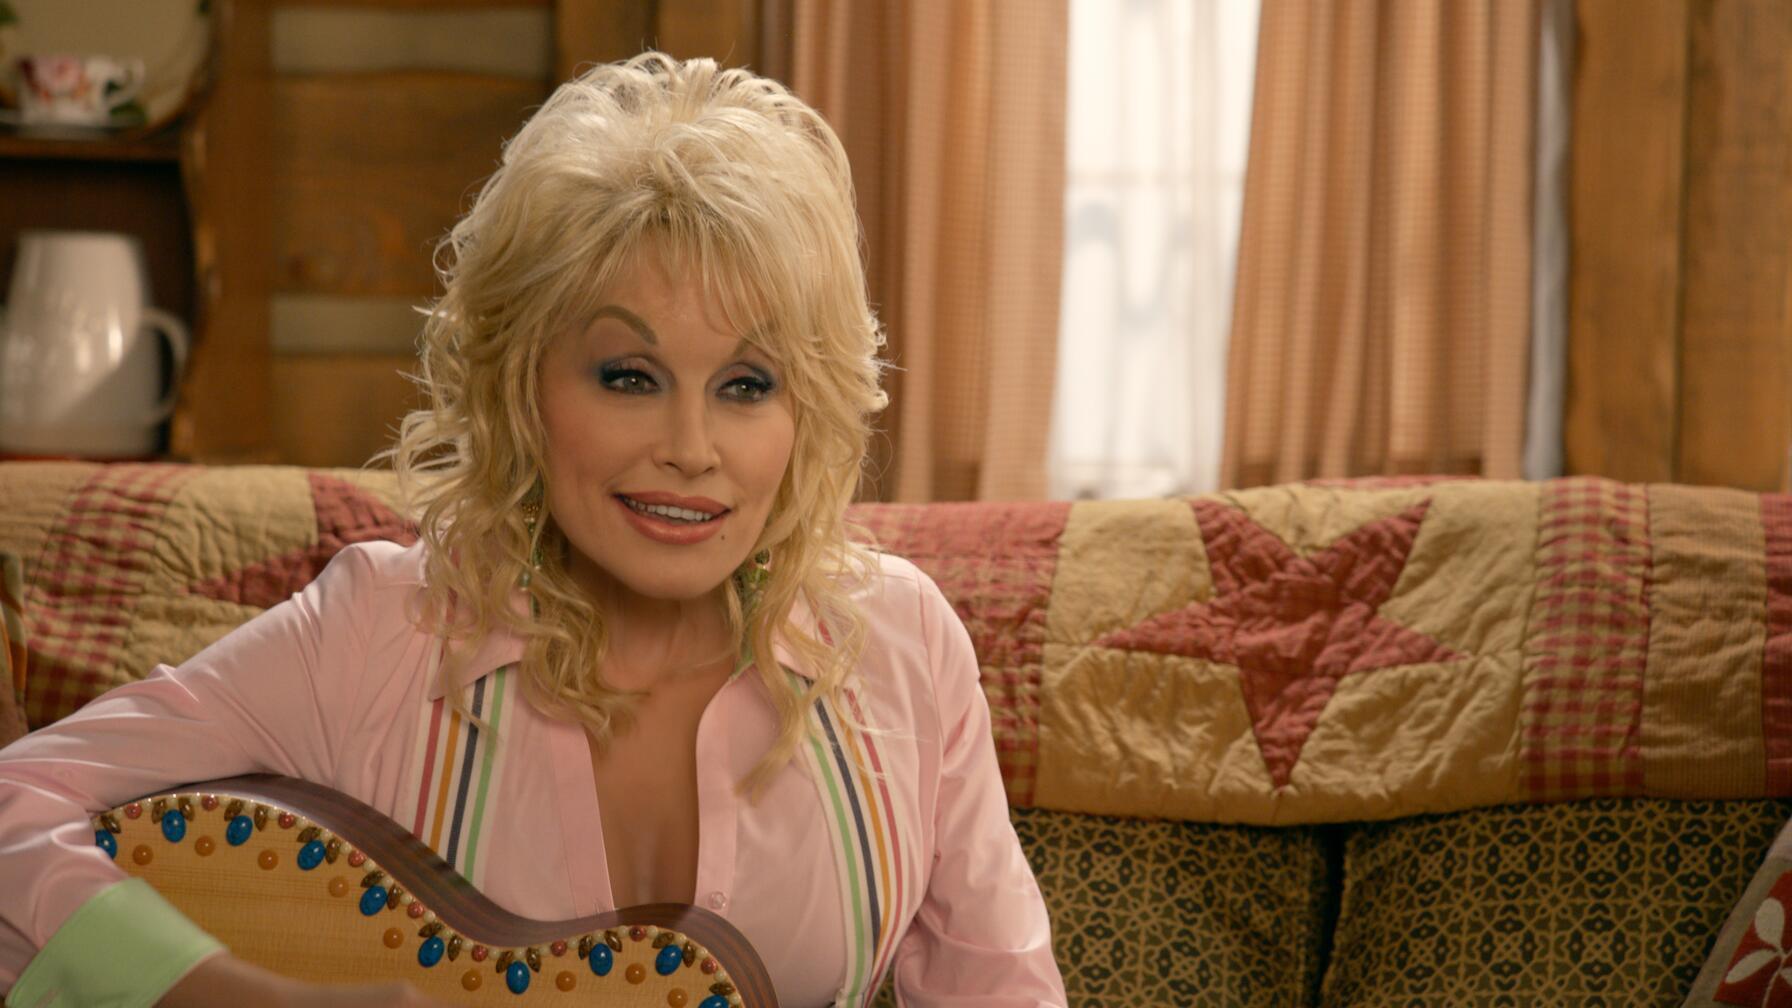 The Orville: New Horizons -- “Midnight Blue” - Episode 308 -- Kelly and Bortus are assigned to a mission that takes them to Heveena’s sanctuary world. Dolly Parton, shown. (Photo by: Greg Gayne/Hulu)